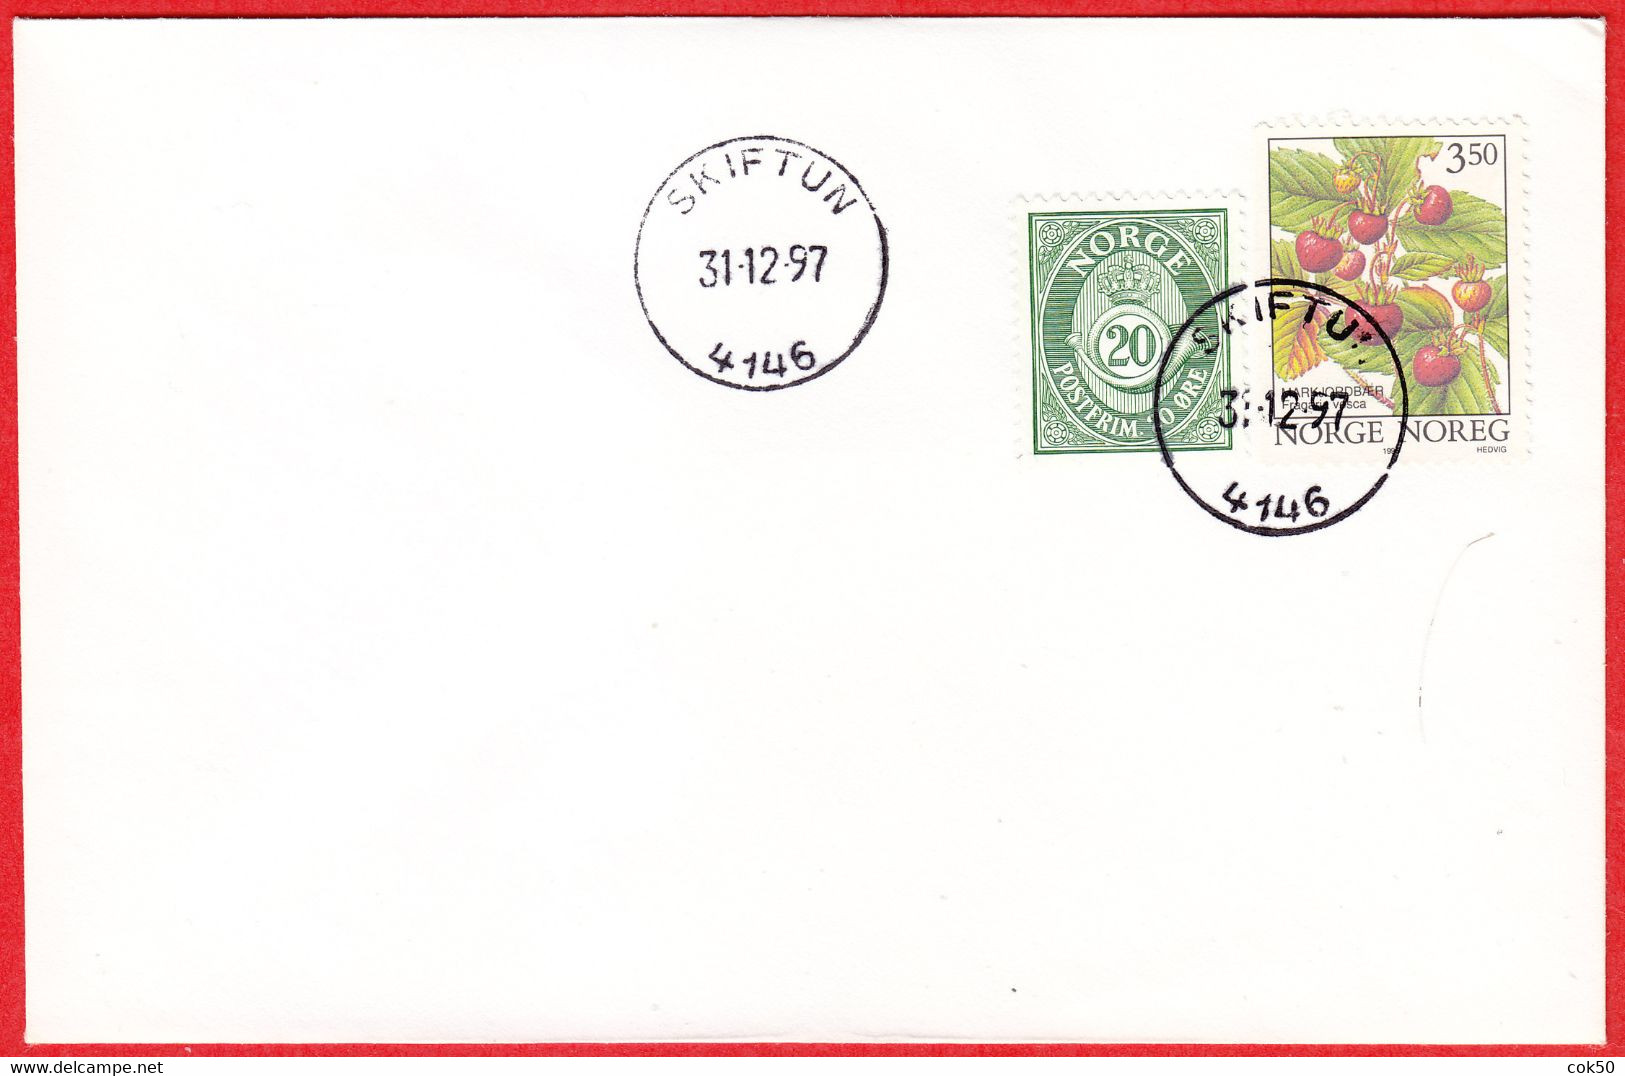 NORWAY - 4146 SKIFTUN (Rogaland County) - Last Day/postoffice Closed On 1997.12.31 - Emissioni Locali